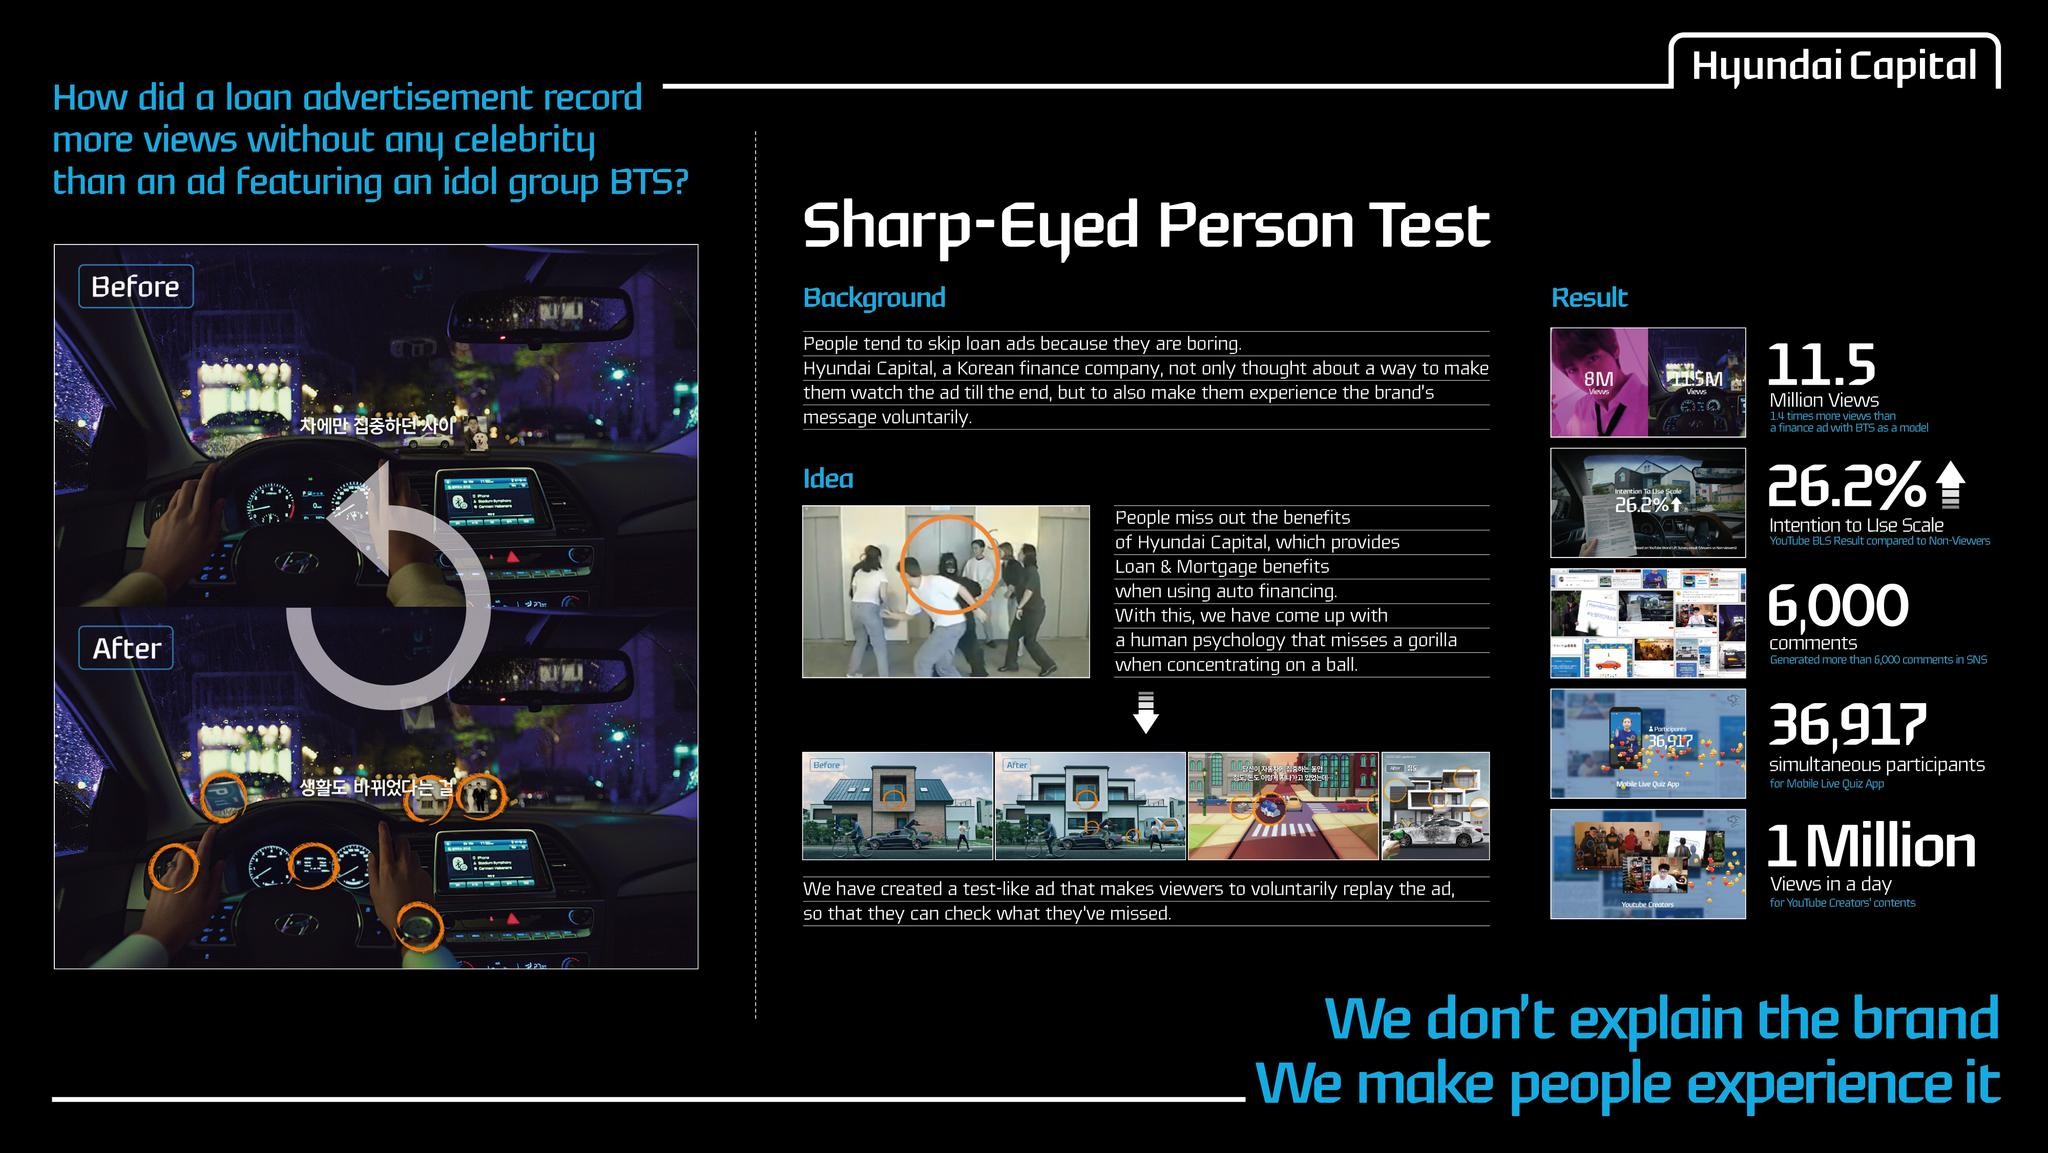 'Sharp-Eyed Person Test’ Campaign by Hyundai Capital